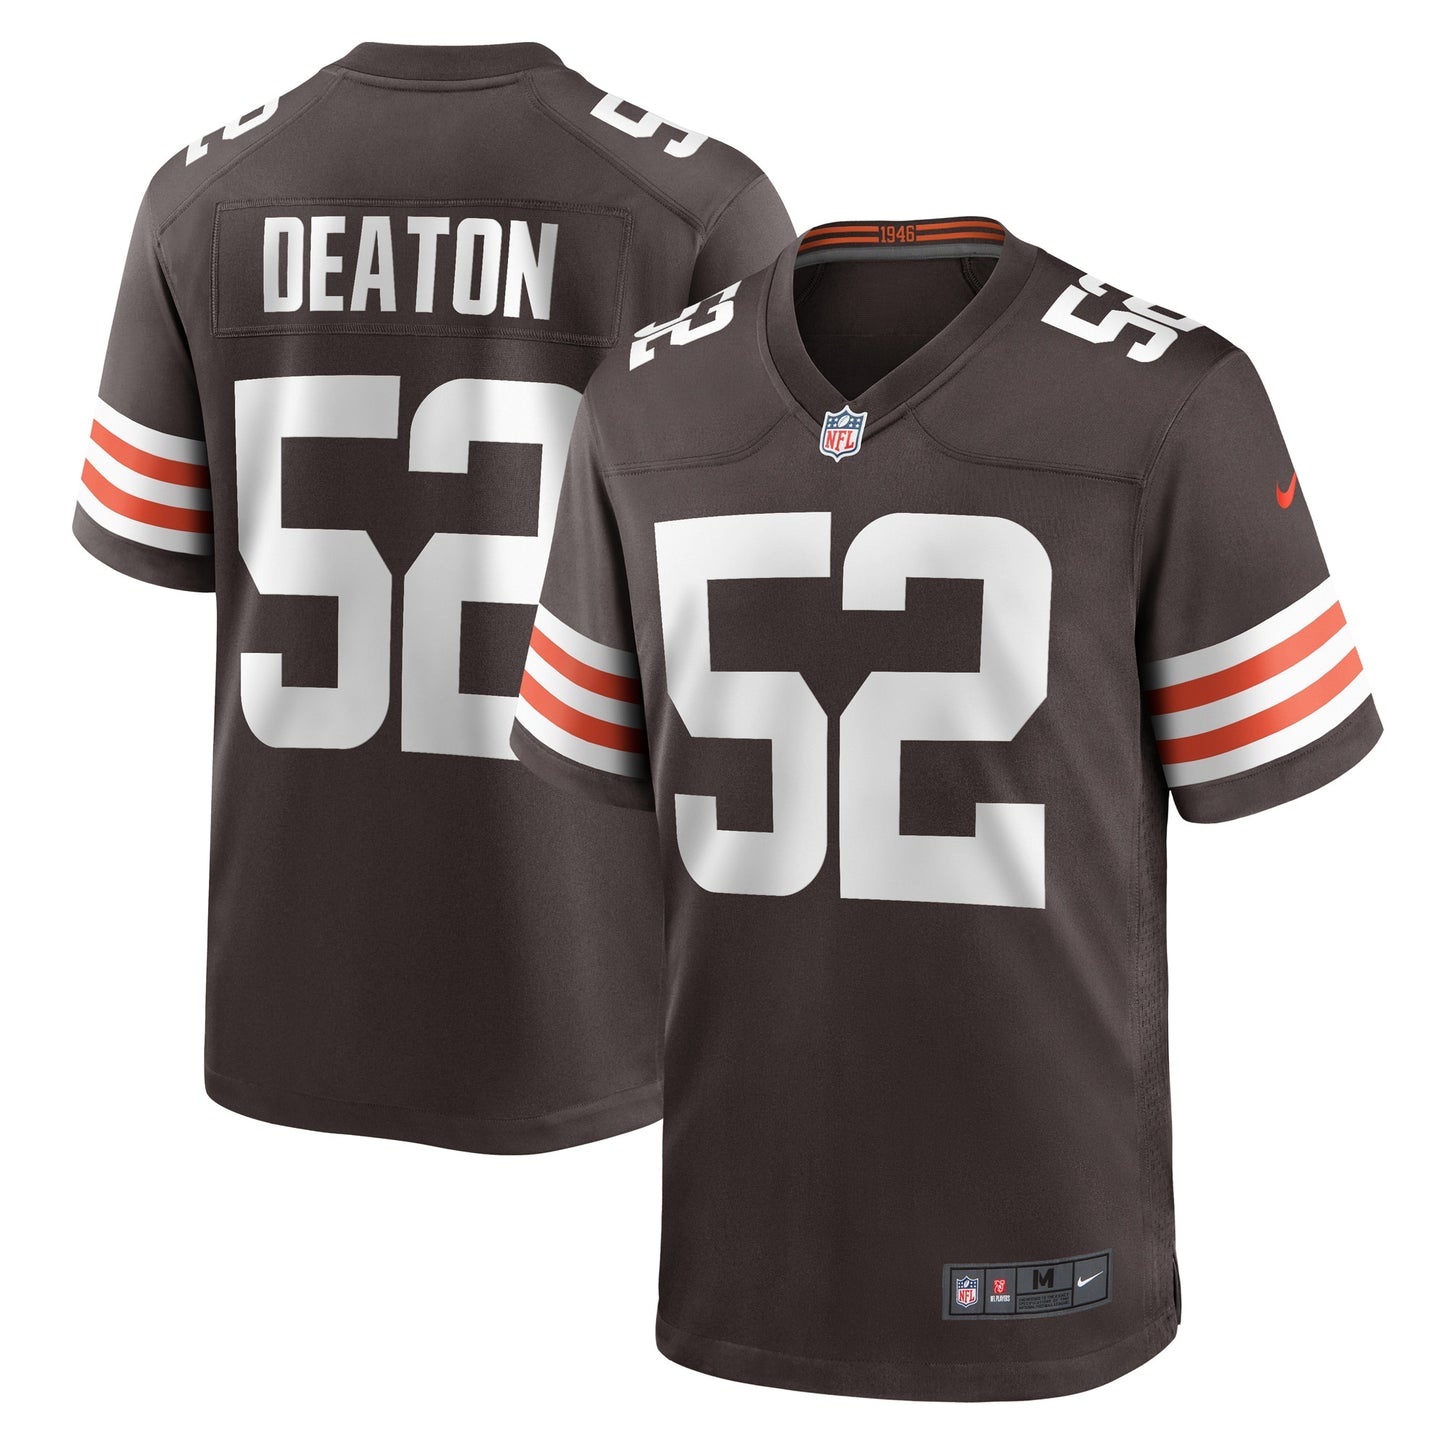 Dawson Deaton Cleveland Browns Nike Game Player Jersey - Brown